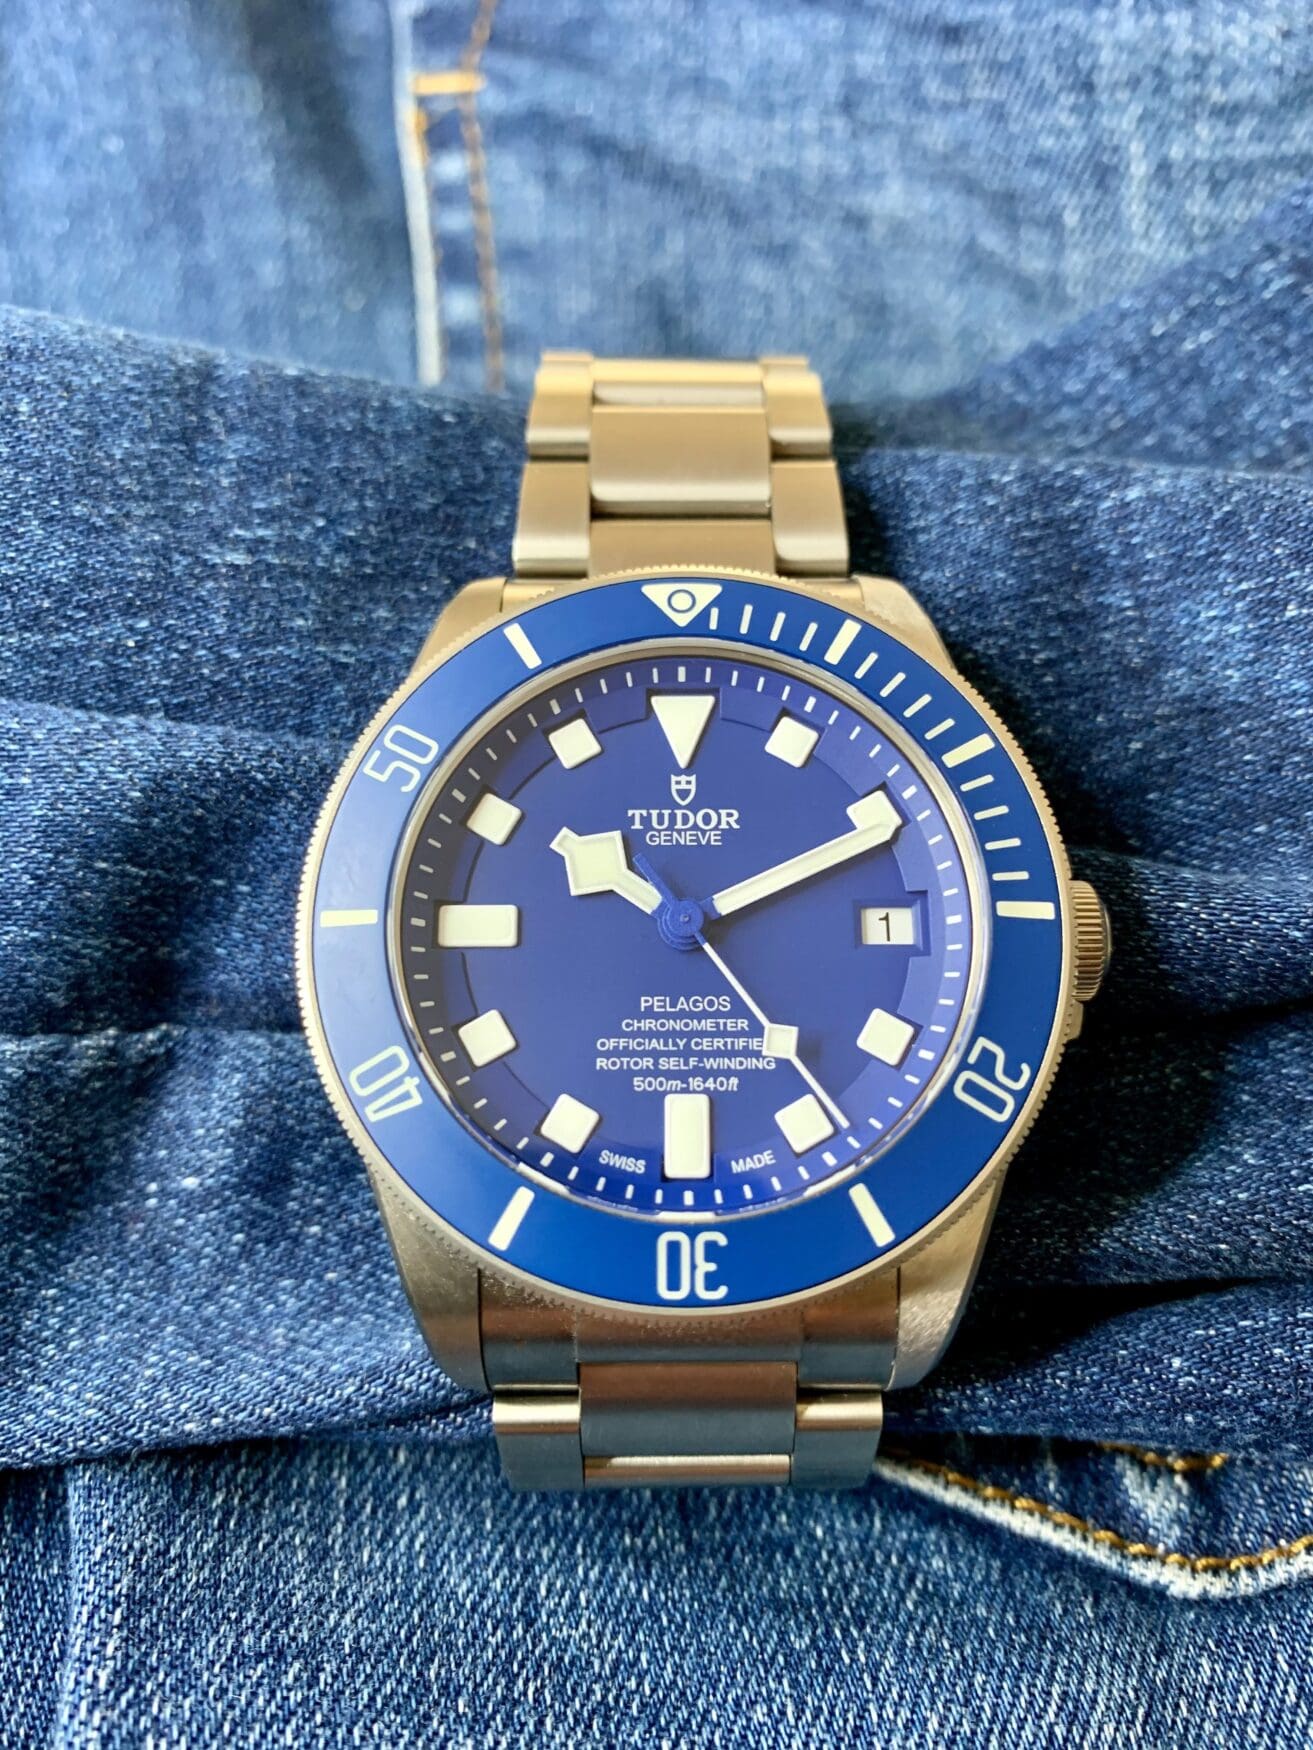 Even before the hype for the new model, the Tudor Pelagos was always criminally underrated